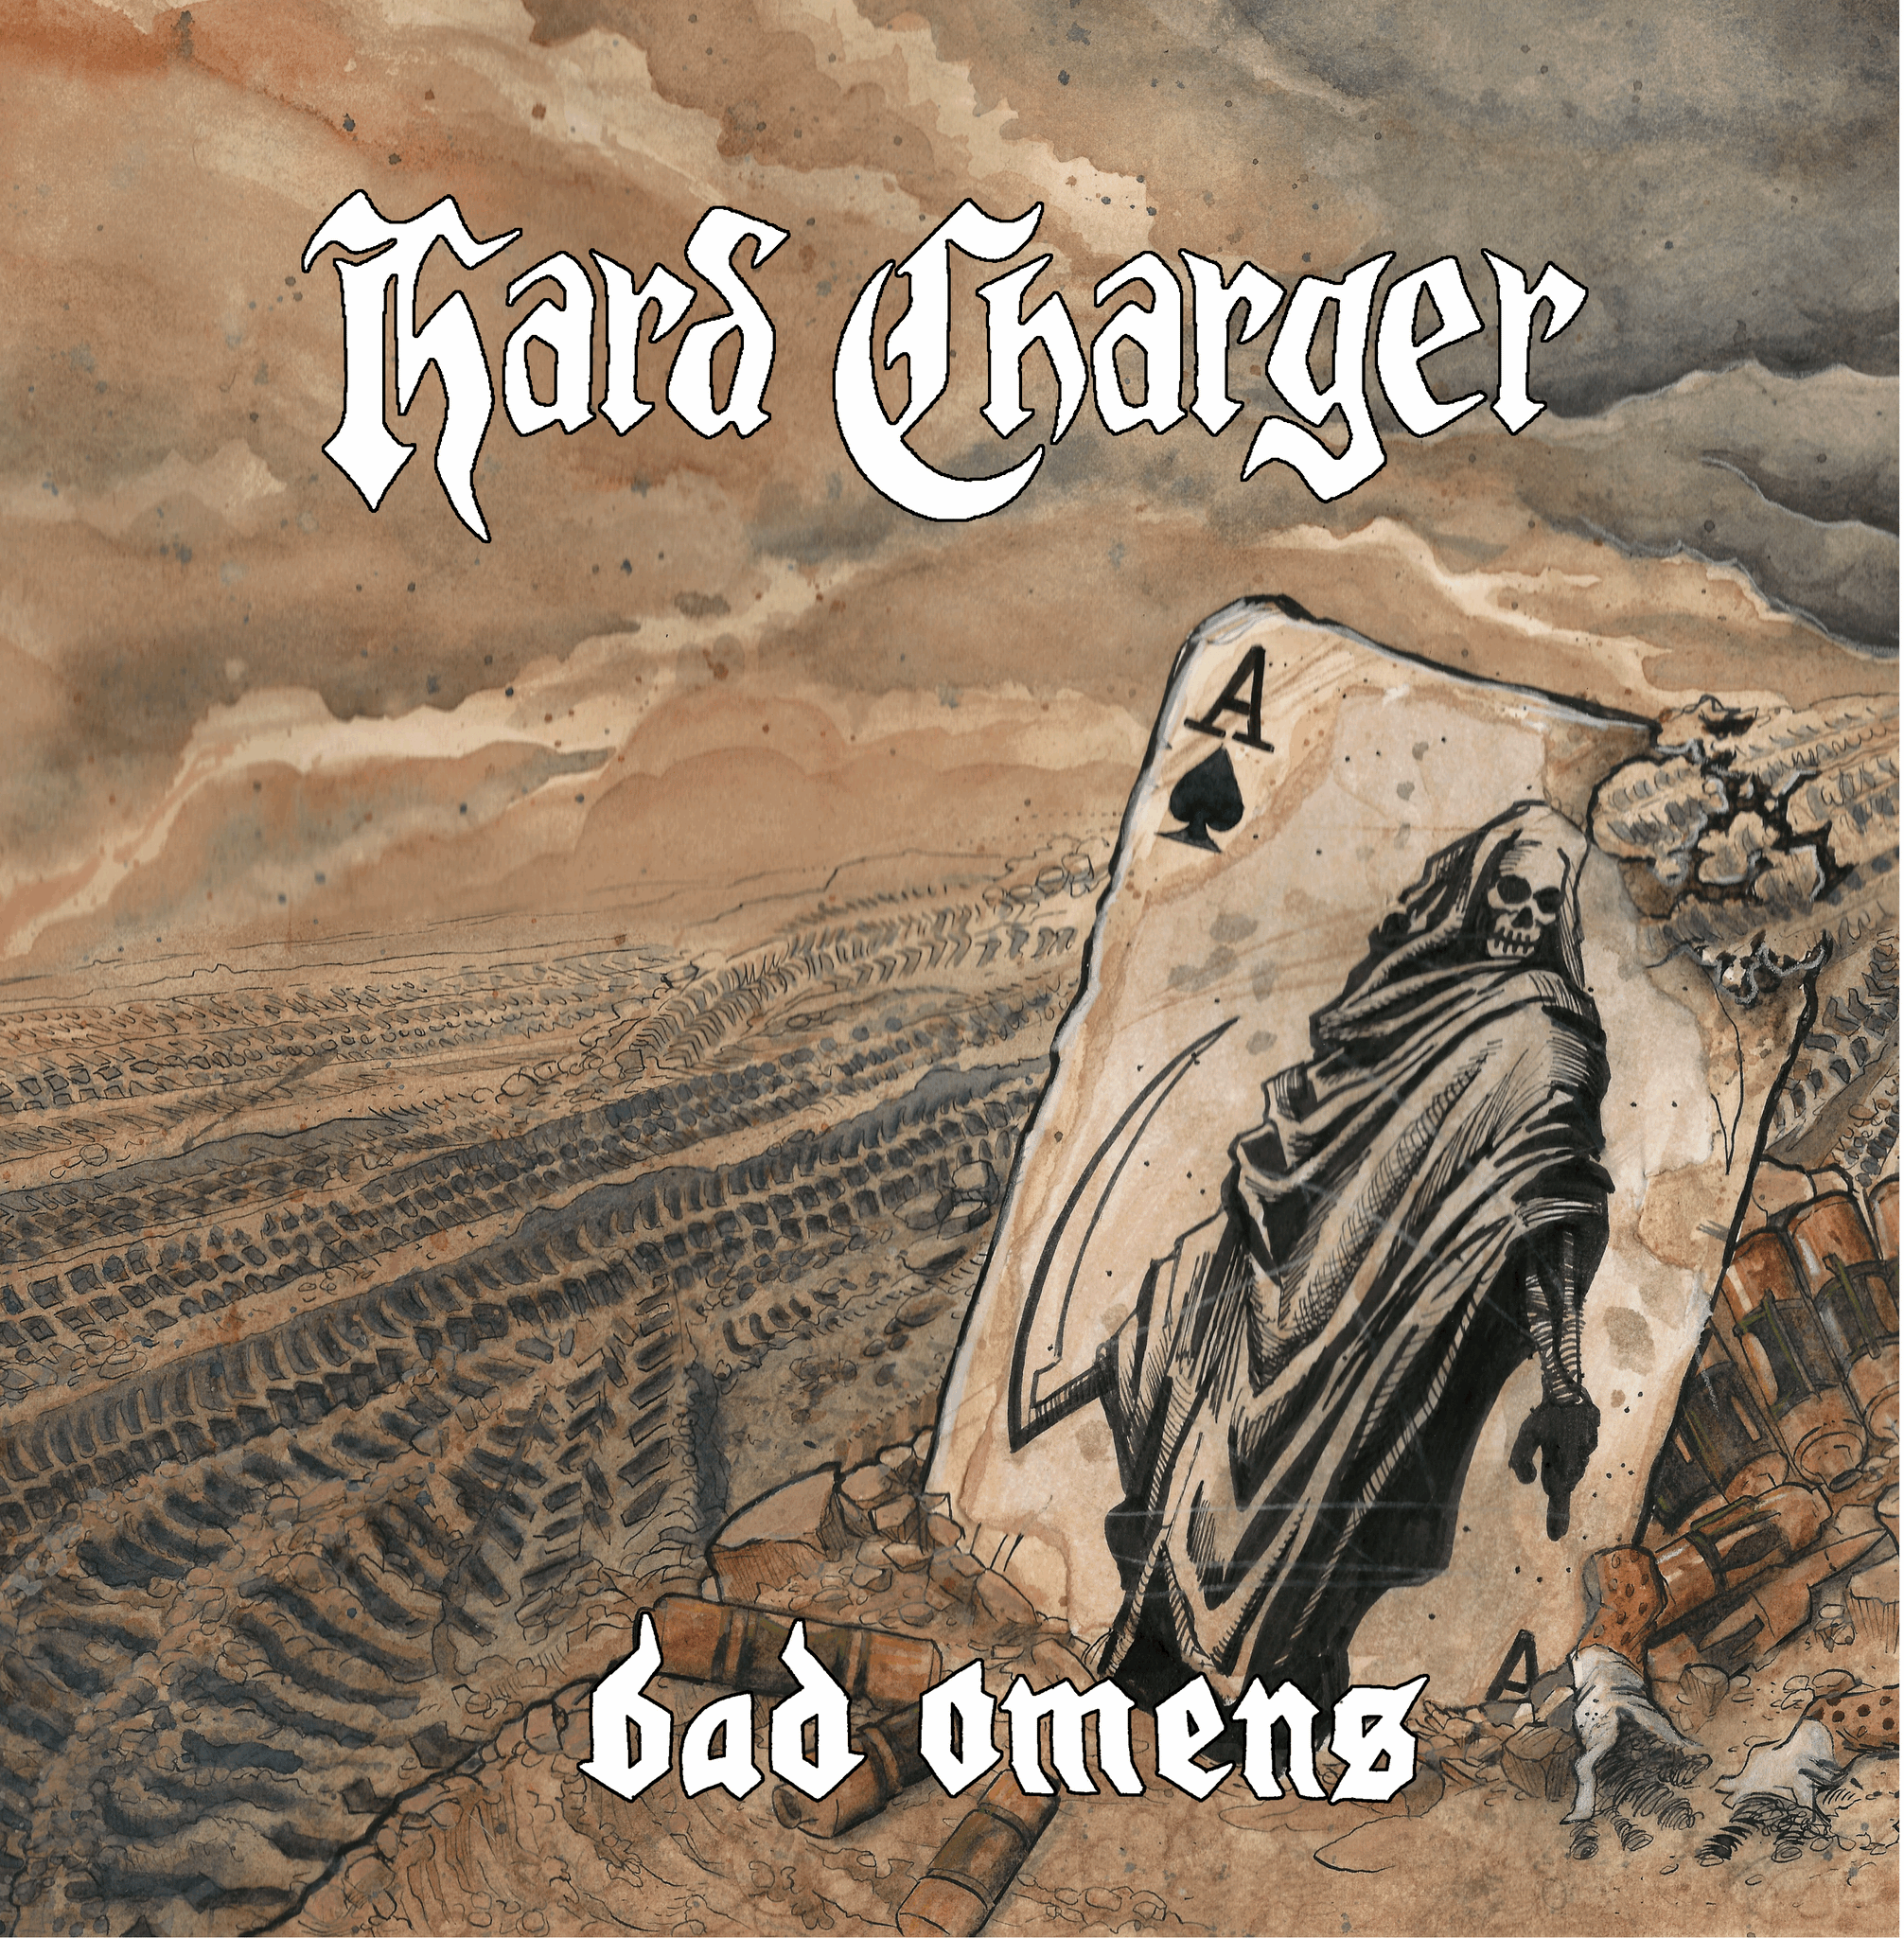 Hard Charger - Bad Omens tape